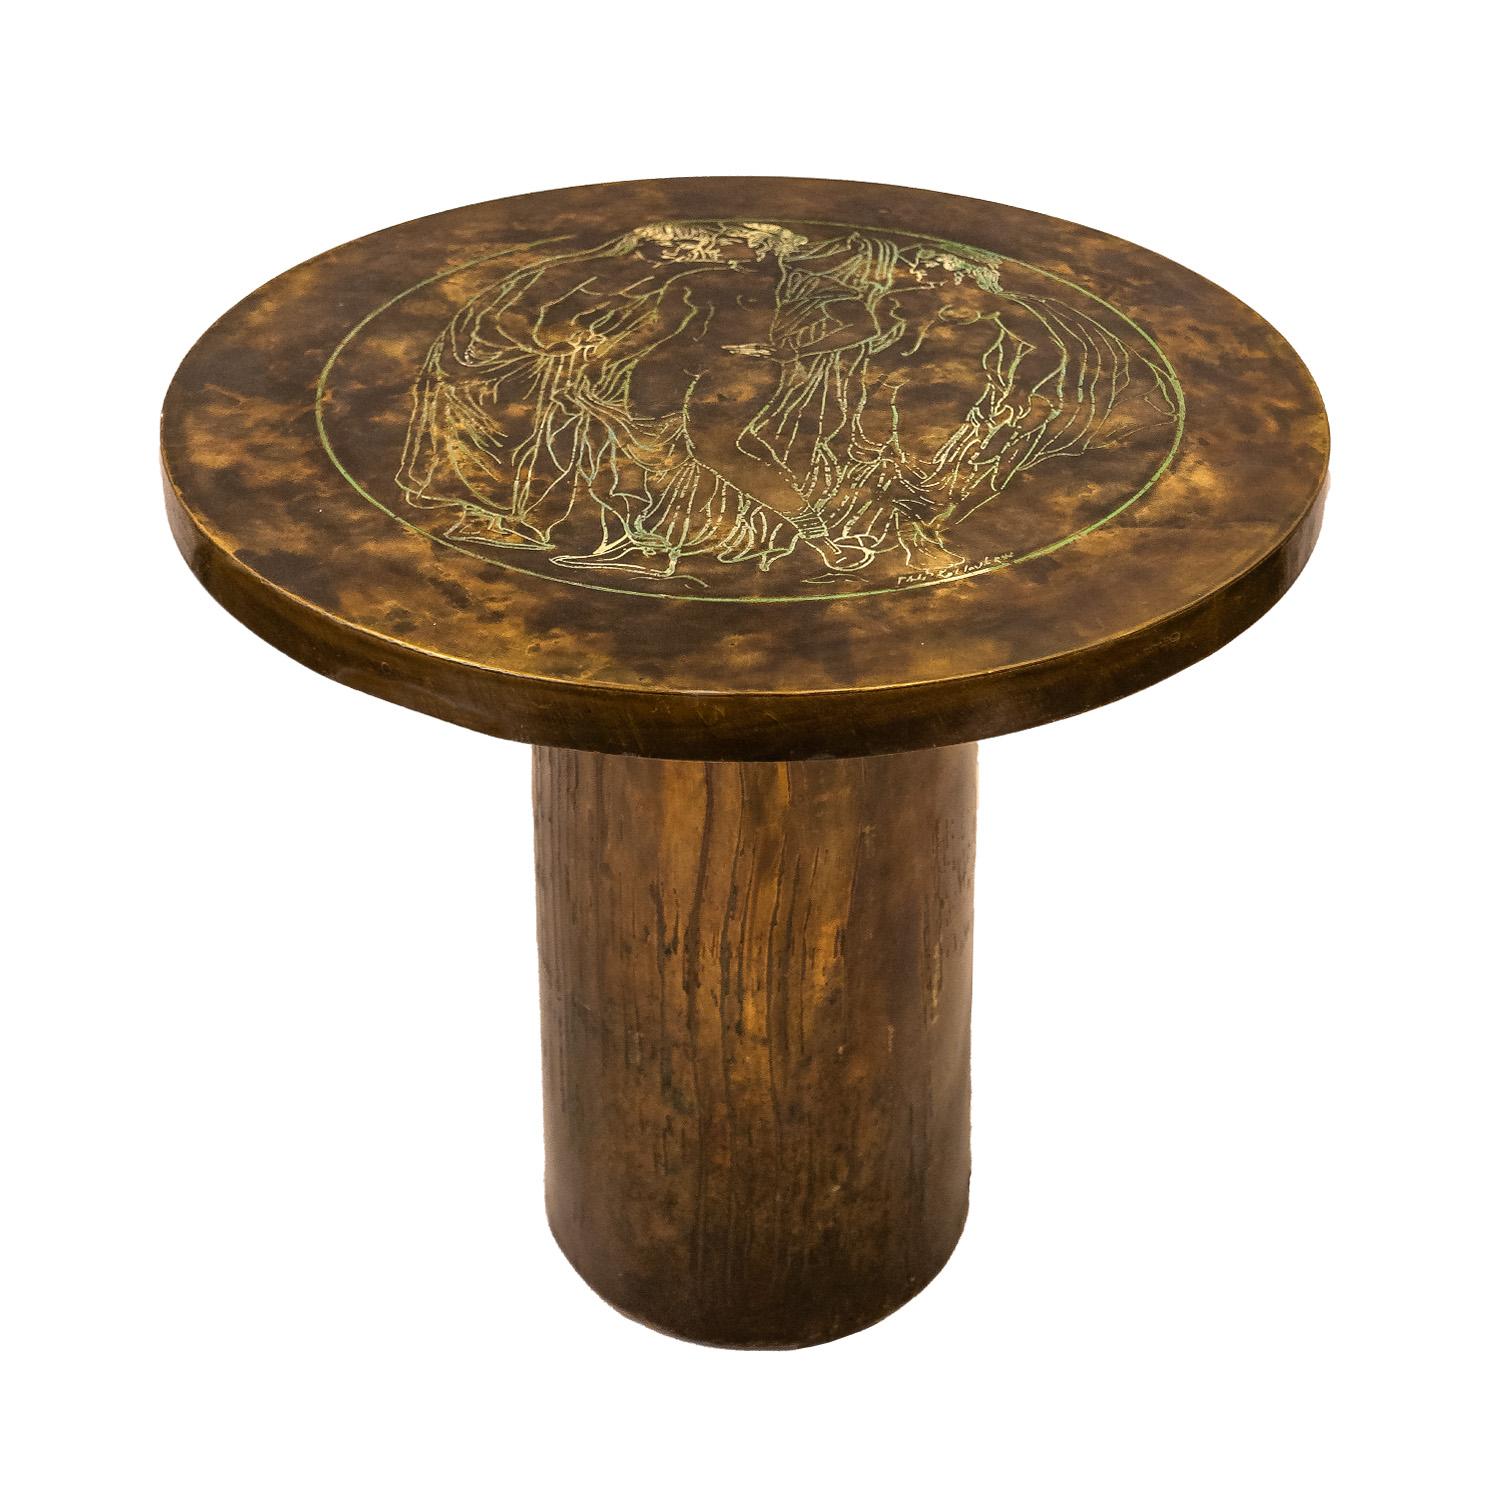 Rare side table in patinated bronze and pewter with classical Roman female nude motif in hand-painted enamels by Philip & Kelvin LaVerne, American 1960's (signed “Philip Kelvin LaVerne” on top).   The patination is stunning on this table and the